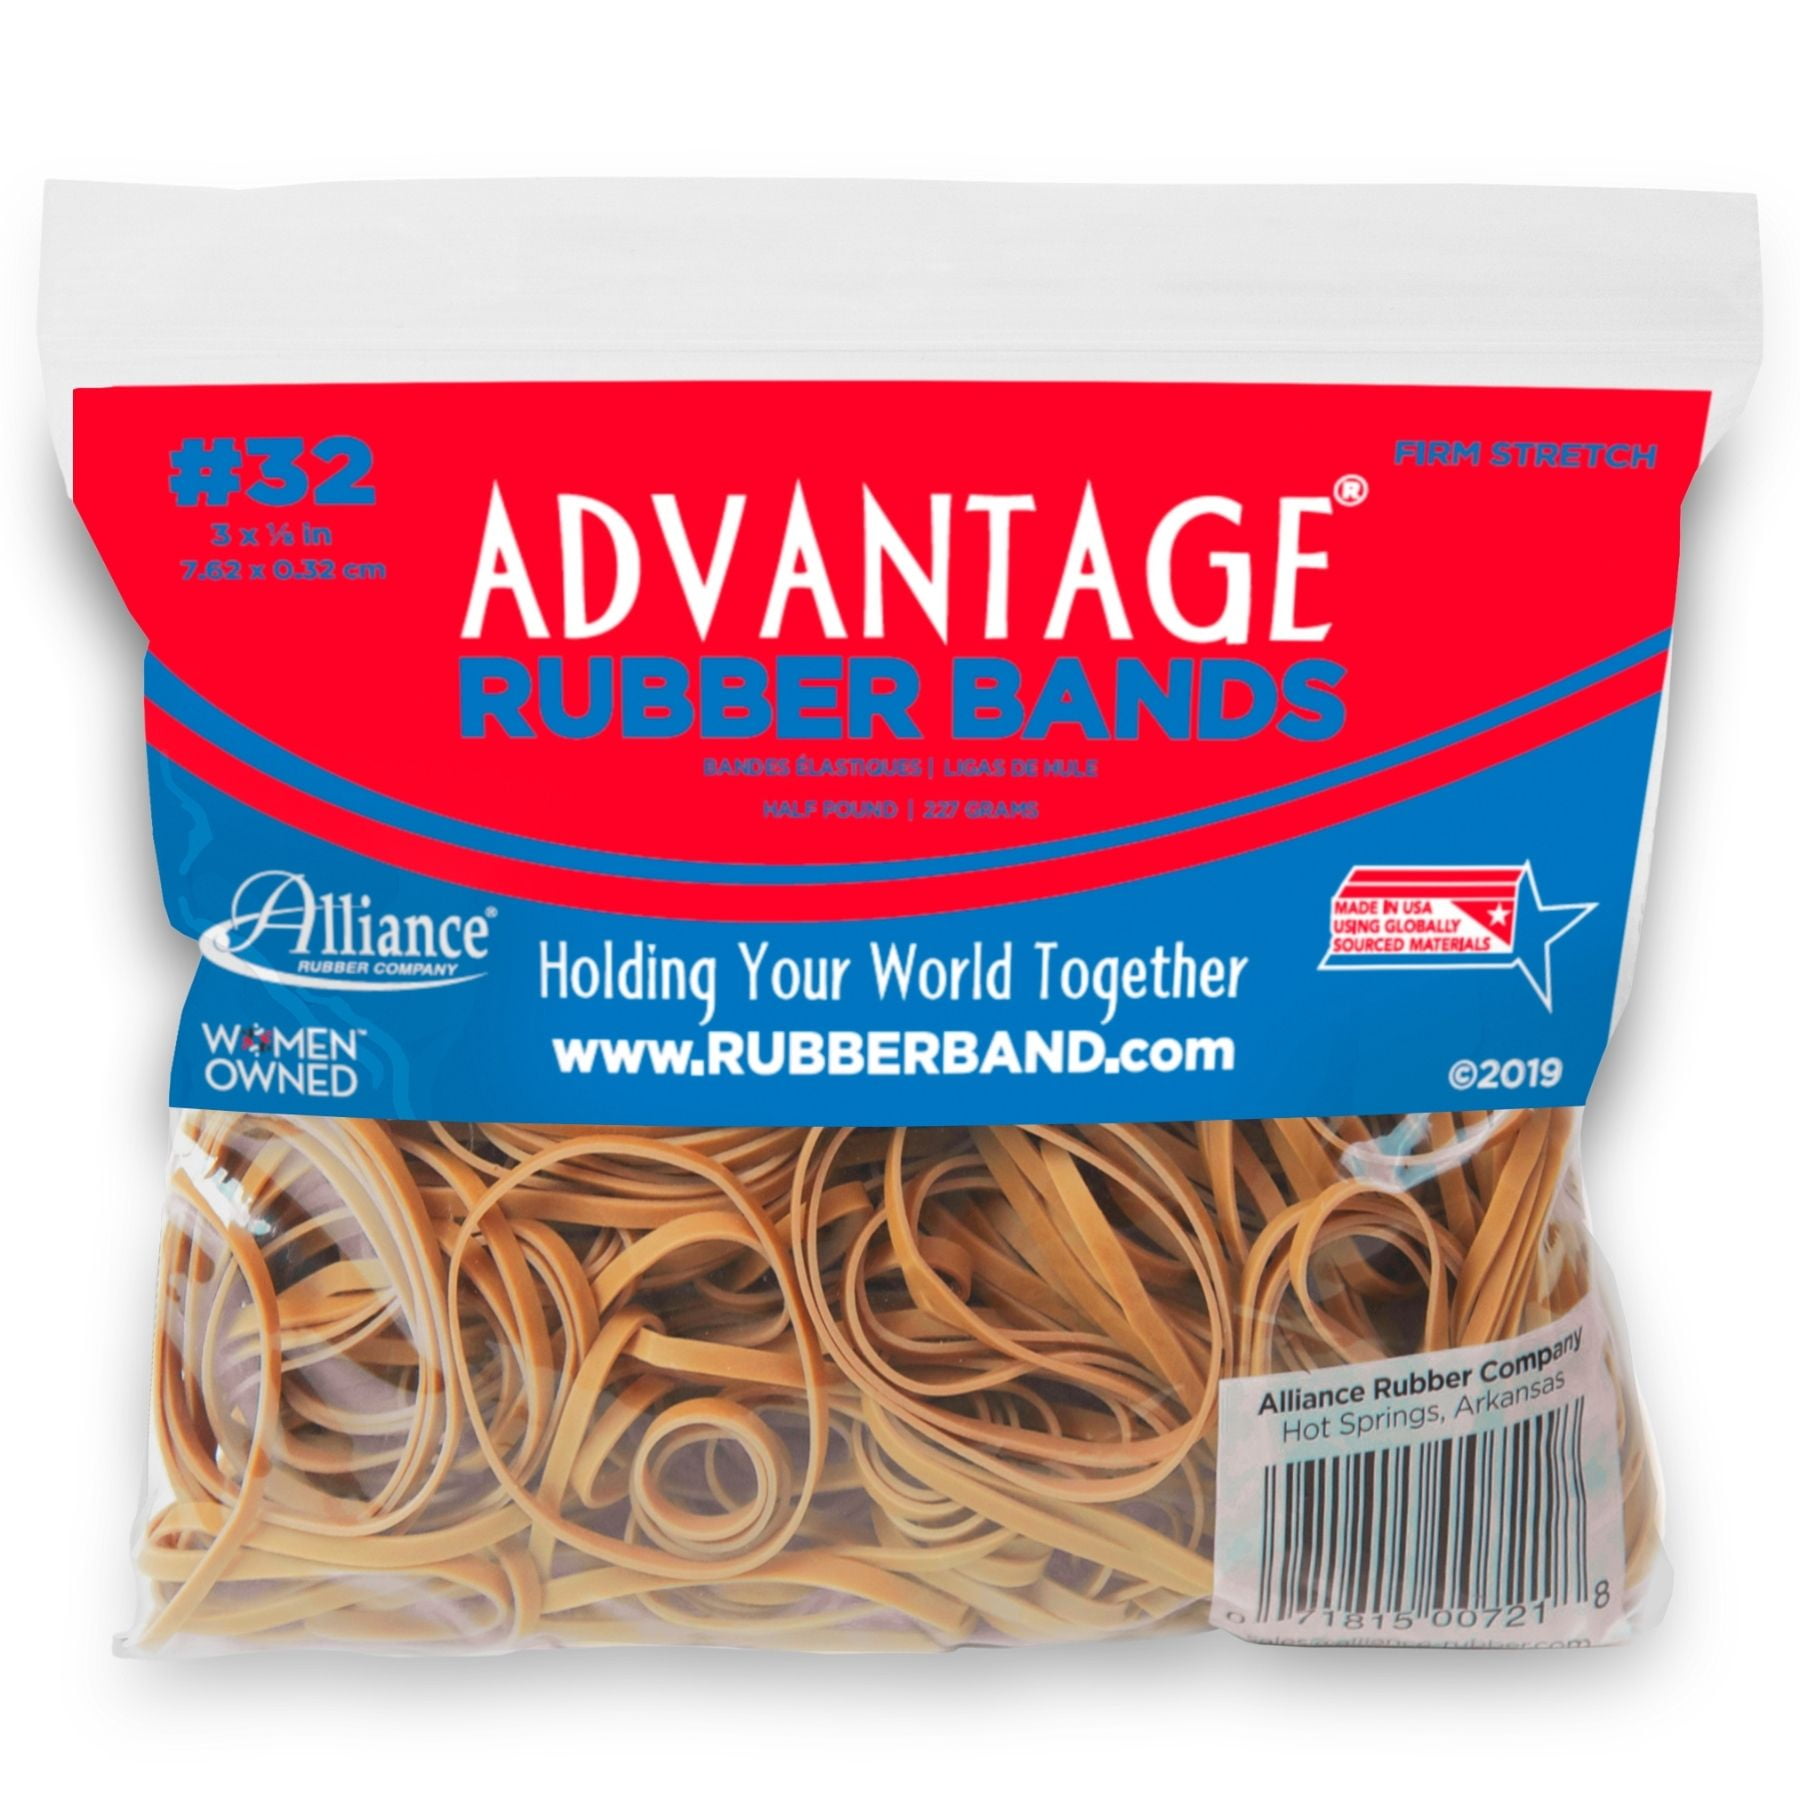 Alliance Latex Free Orange Rubber Bands Size 64 3 1 2 x 1 4 Inches 380 1 Pound 